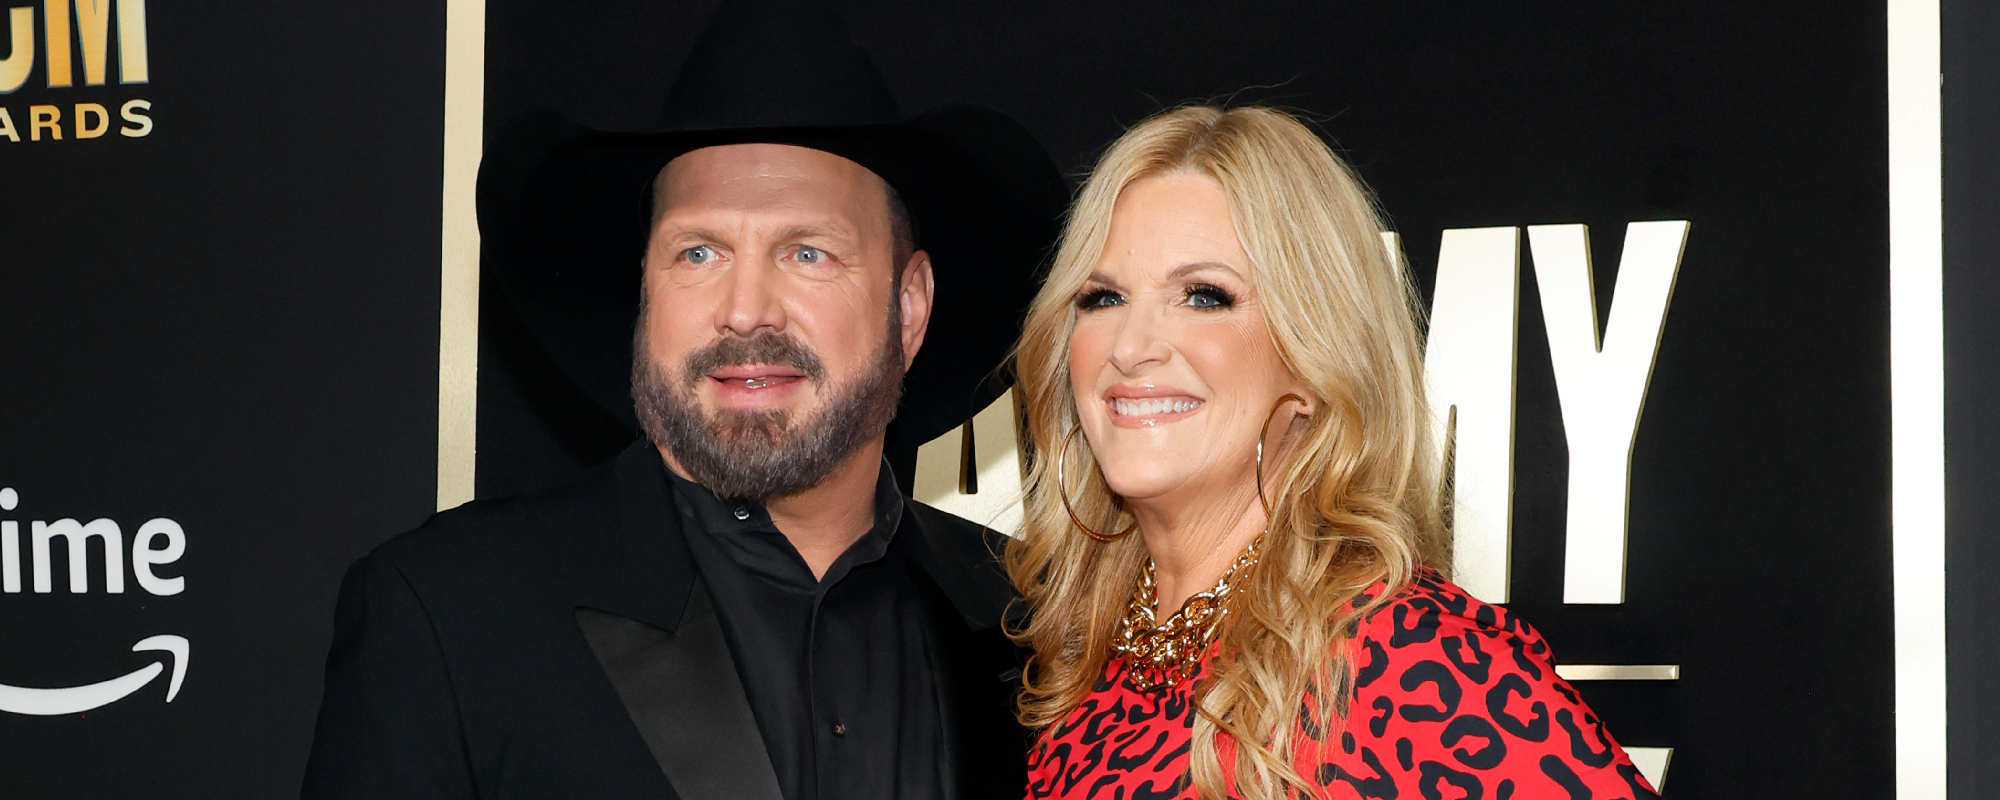 Garth Brooks & Trisha Yearwood Tease Honky-Tonk Bar in New Docuseries ‘Friends in Low Places’